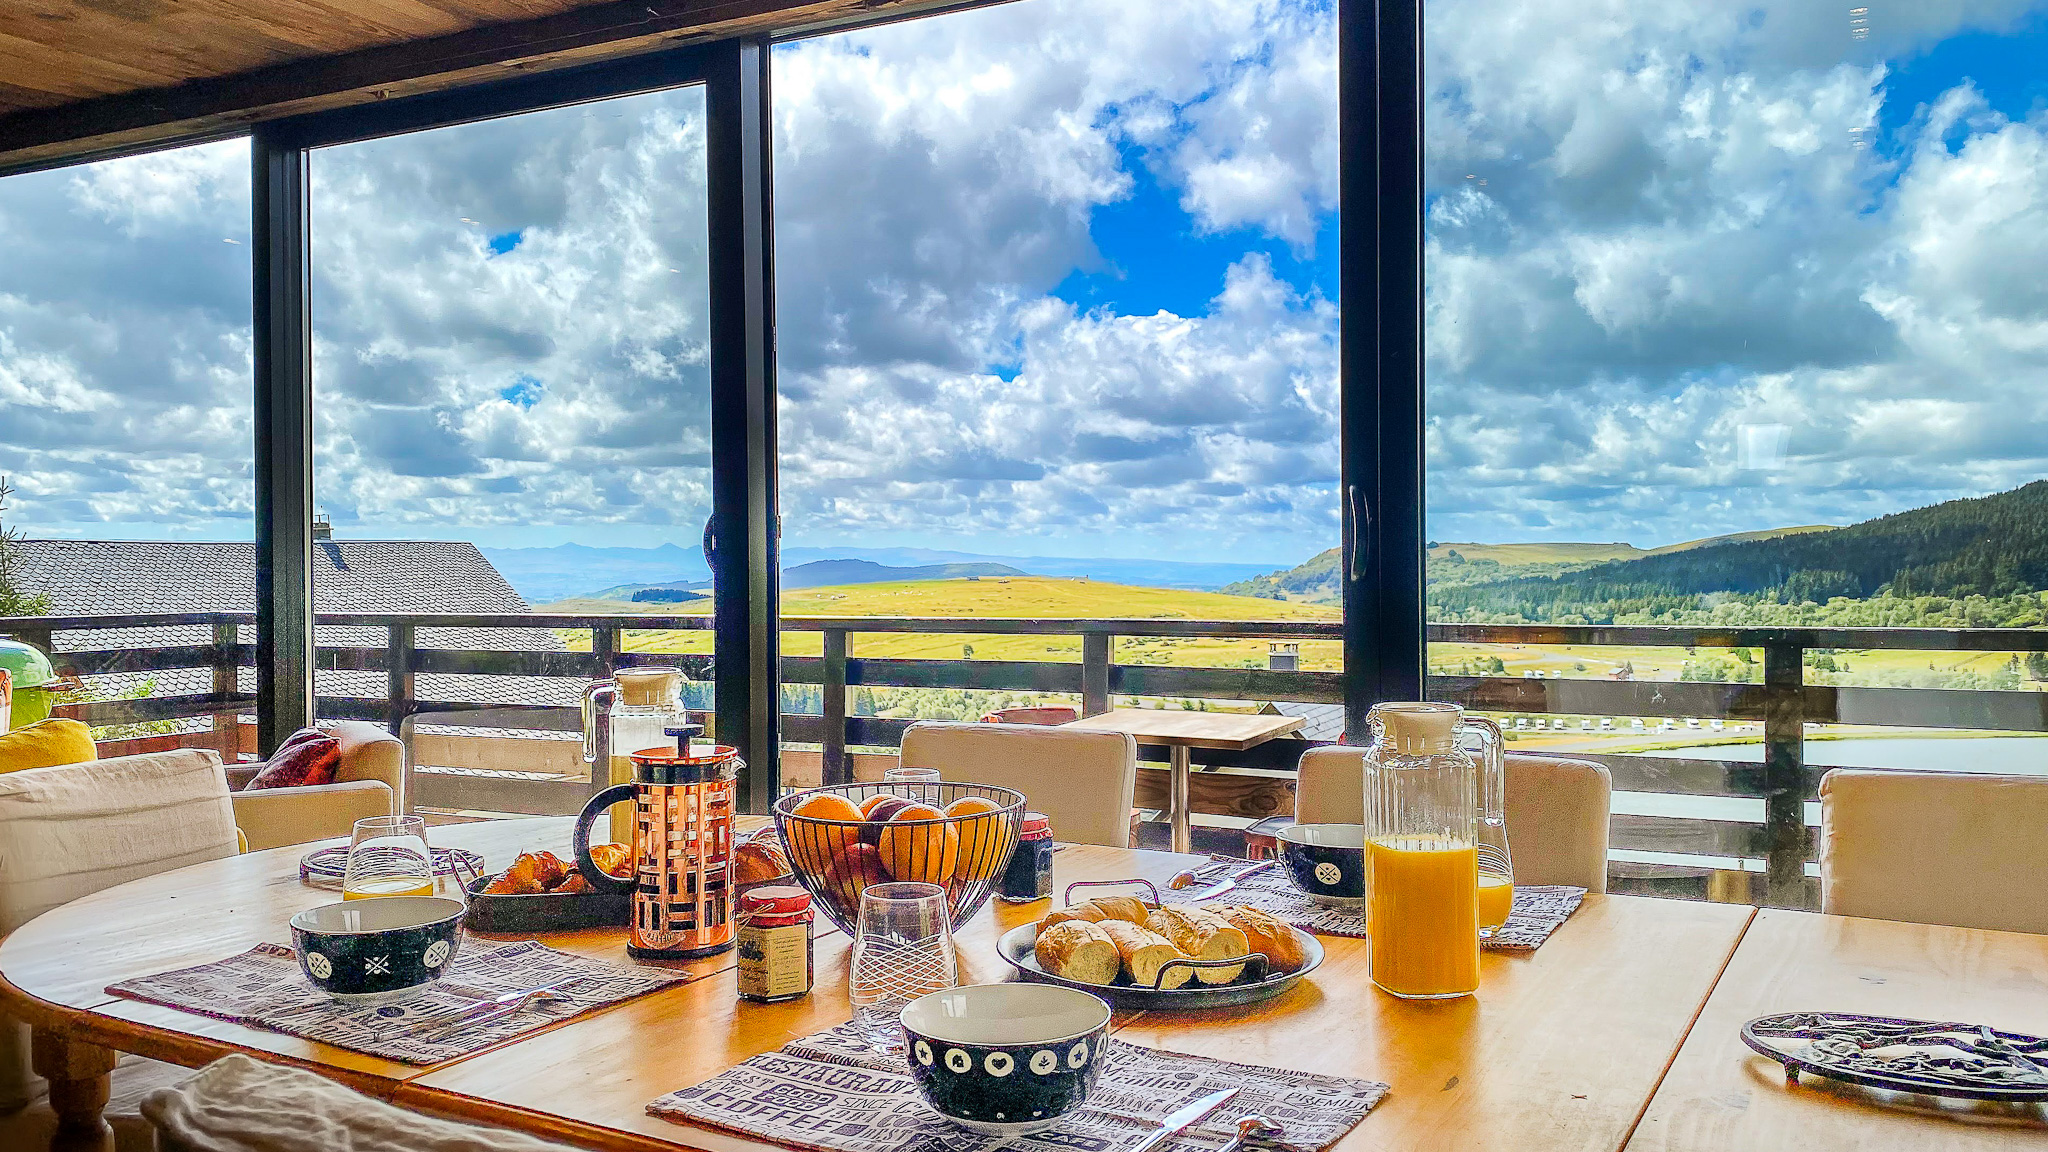 Super Besse winter sports resort, Chalet l'Anorak Super Besse- Breakfast with a view of the Cantal Mountains